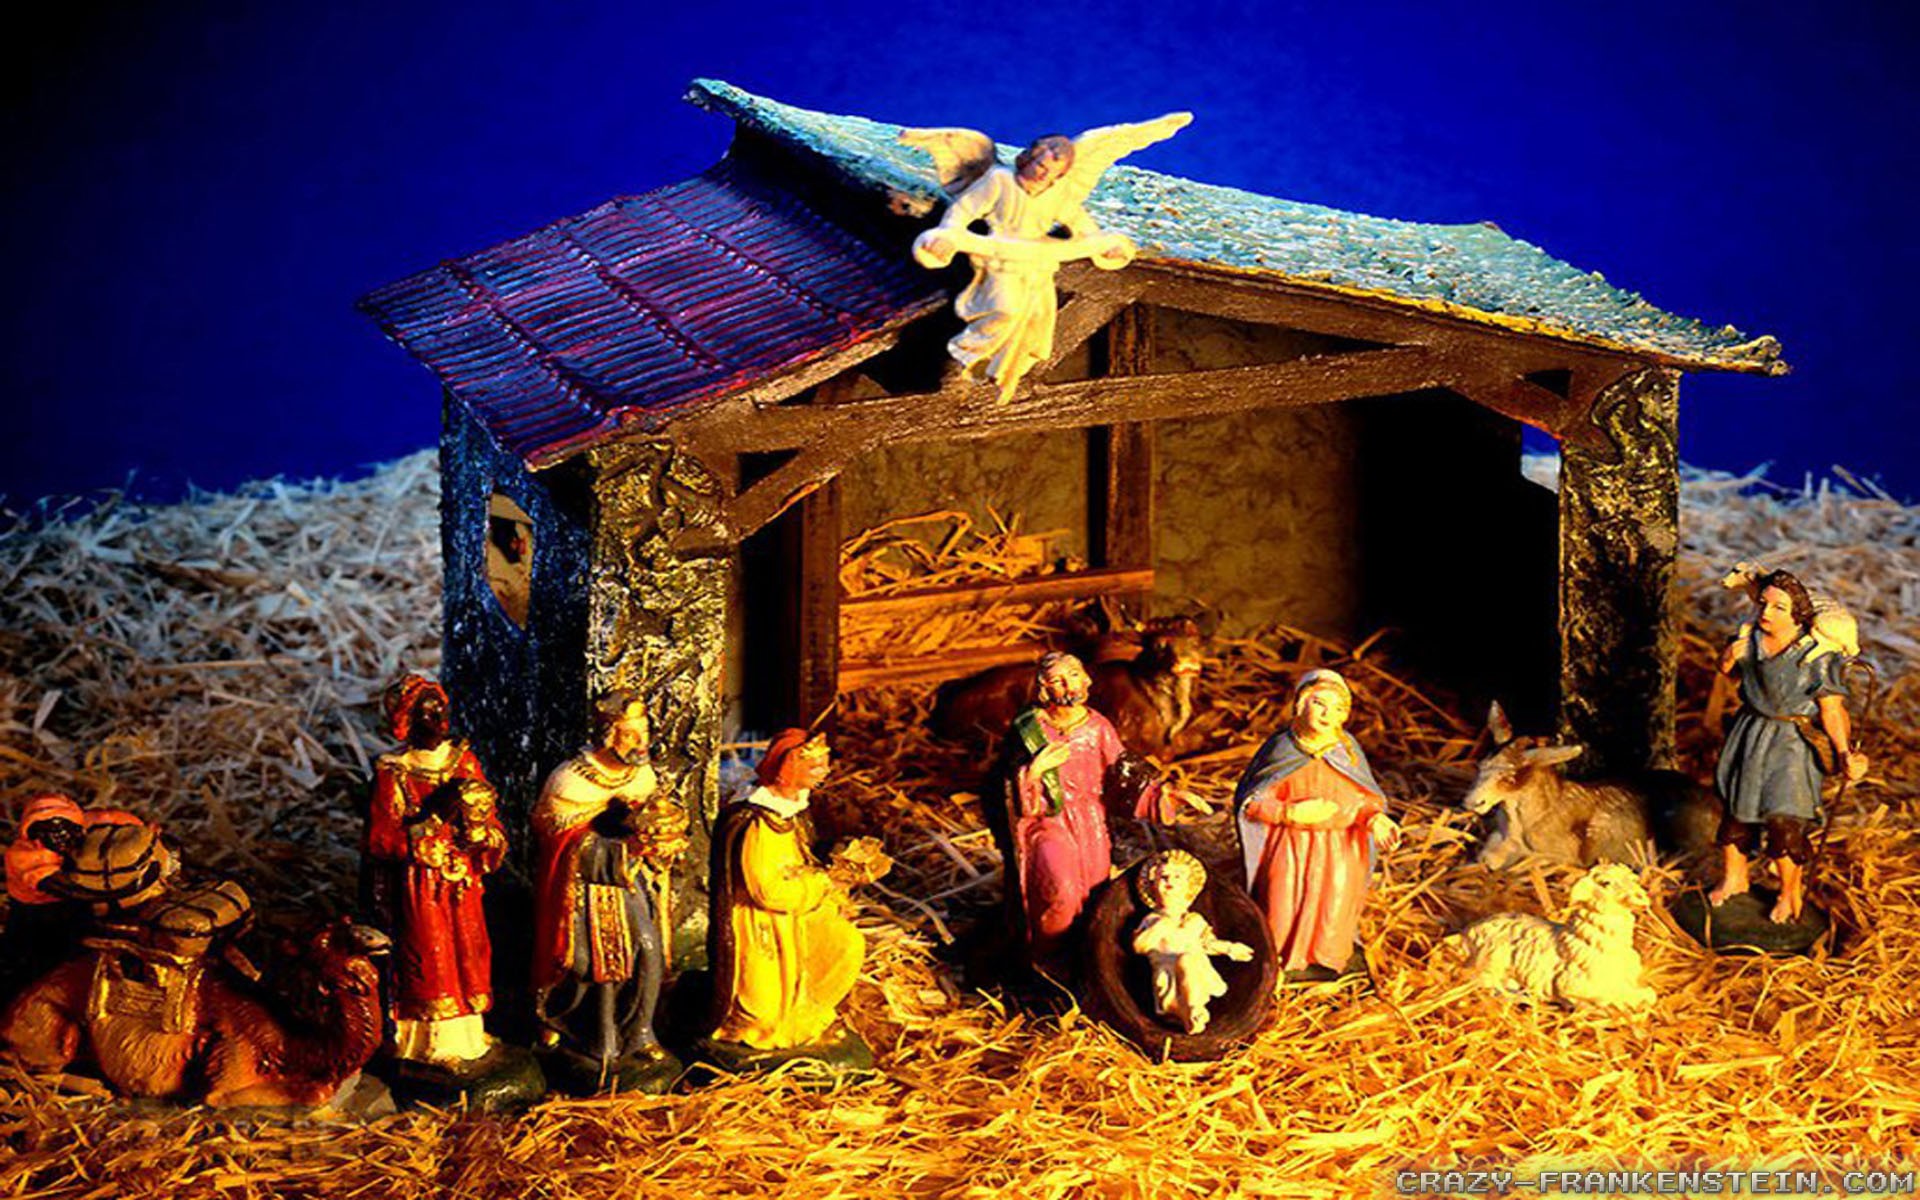 nativity scene wallpapers backgrounds resolution stable desktop frankenstein crazy catholic holiday widescreen res vertical android iphone kb ipad mobile